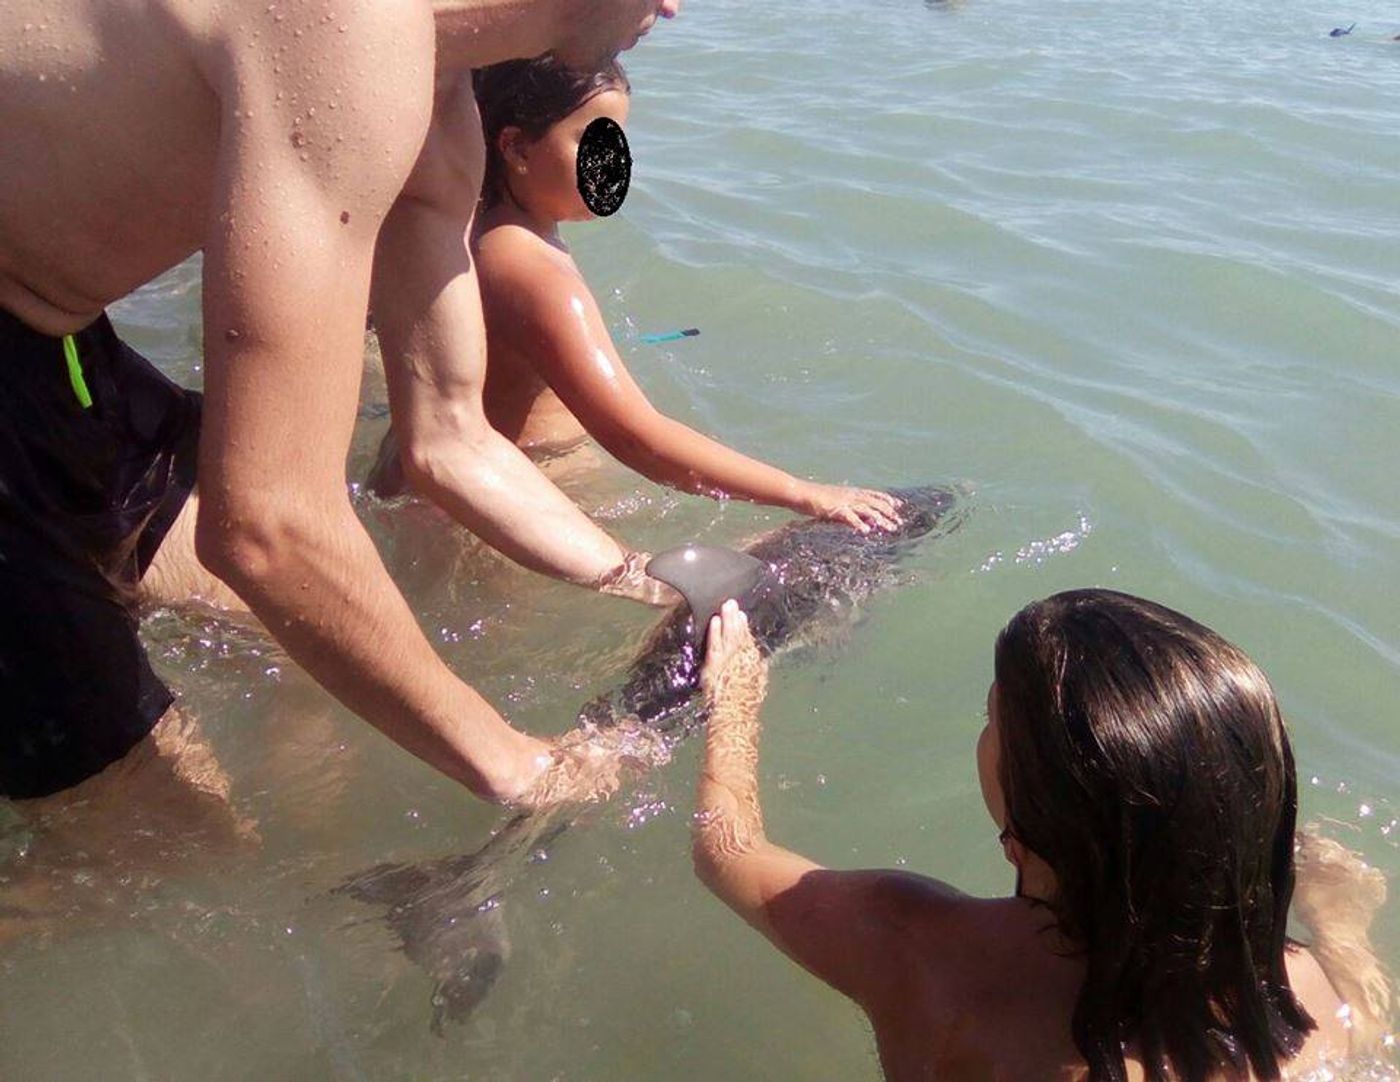 Beachgoers pet and take photos of a baby female dolphin at a beach in Spain. The dolphin later died from the handling.